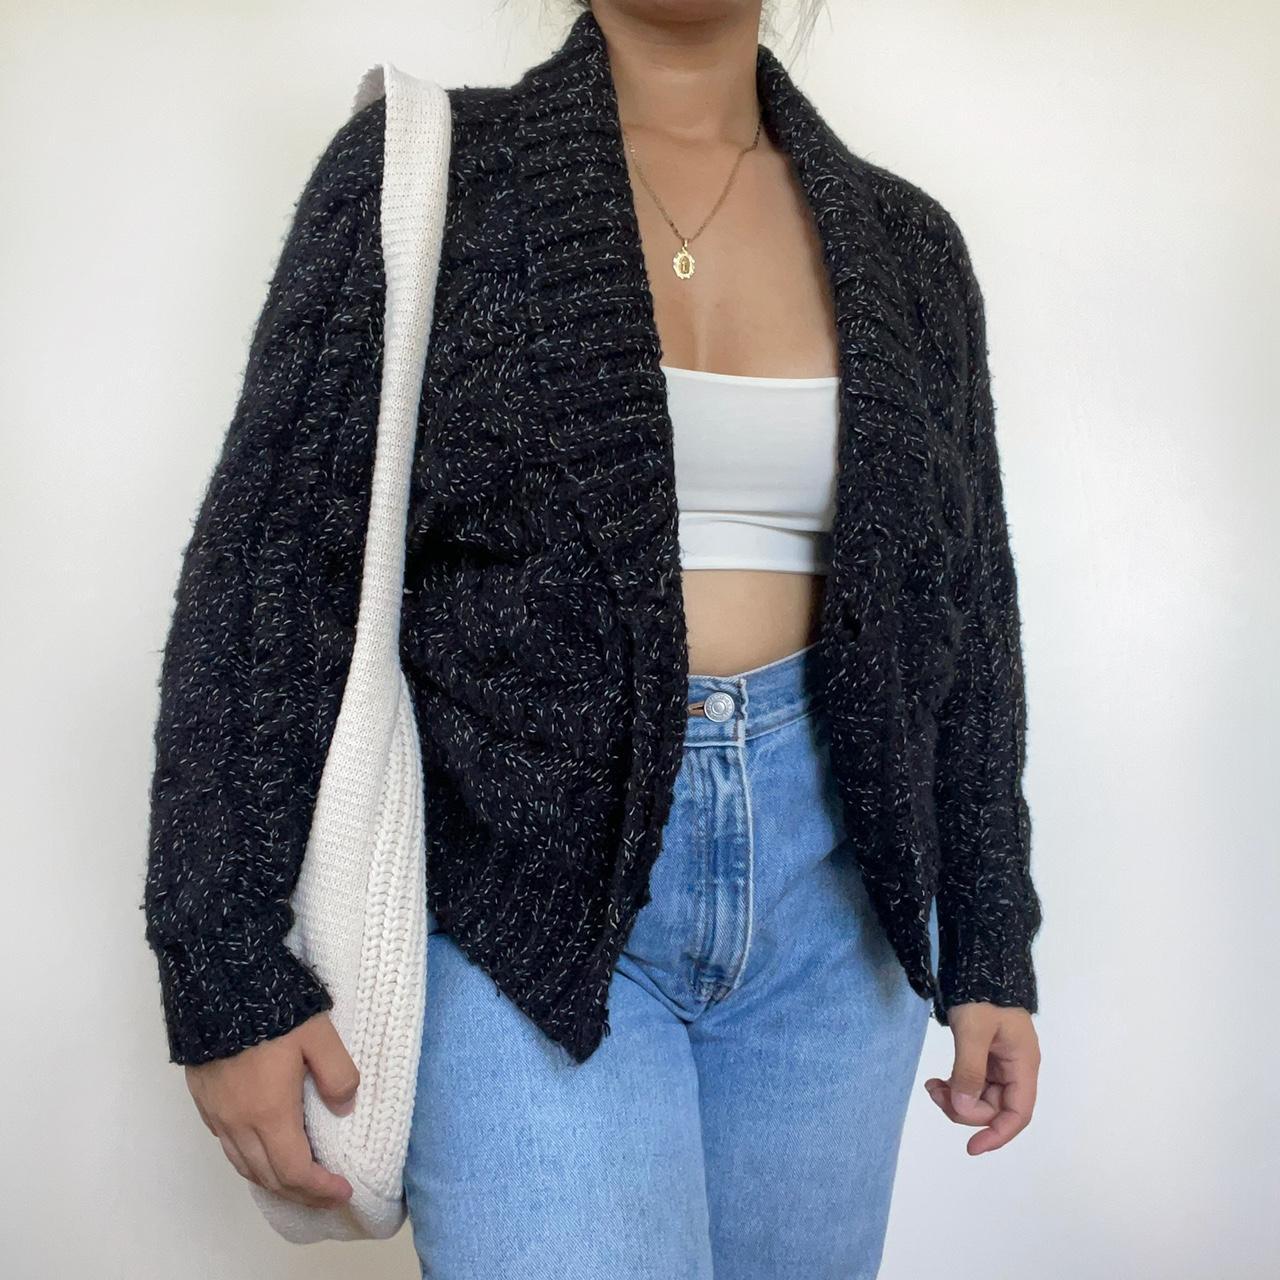 Product Image 1 - Black Cable Knit Cardigan🌻

❀ labeled